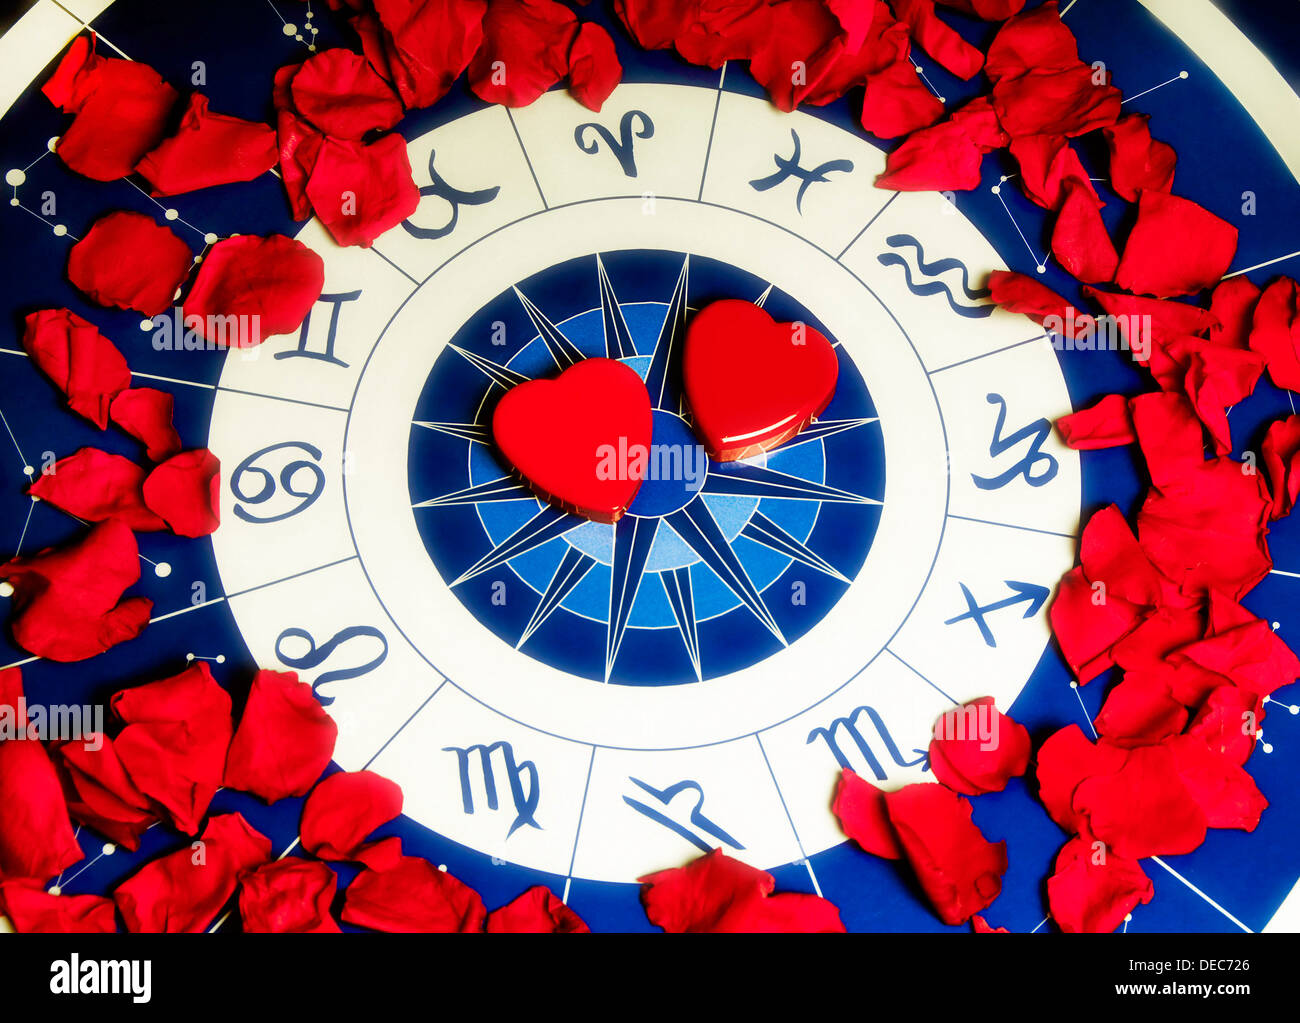 red rose petals around an astrology wheel with two heart shapes Stock Photo